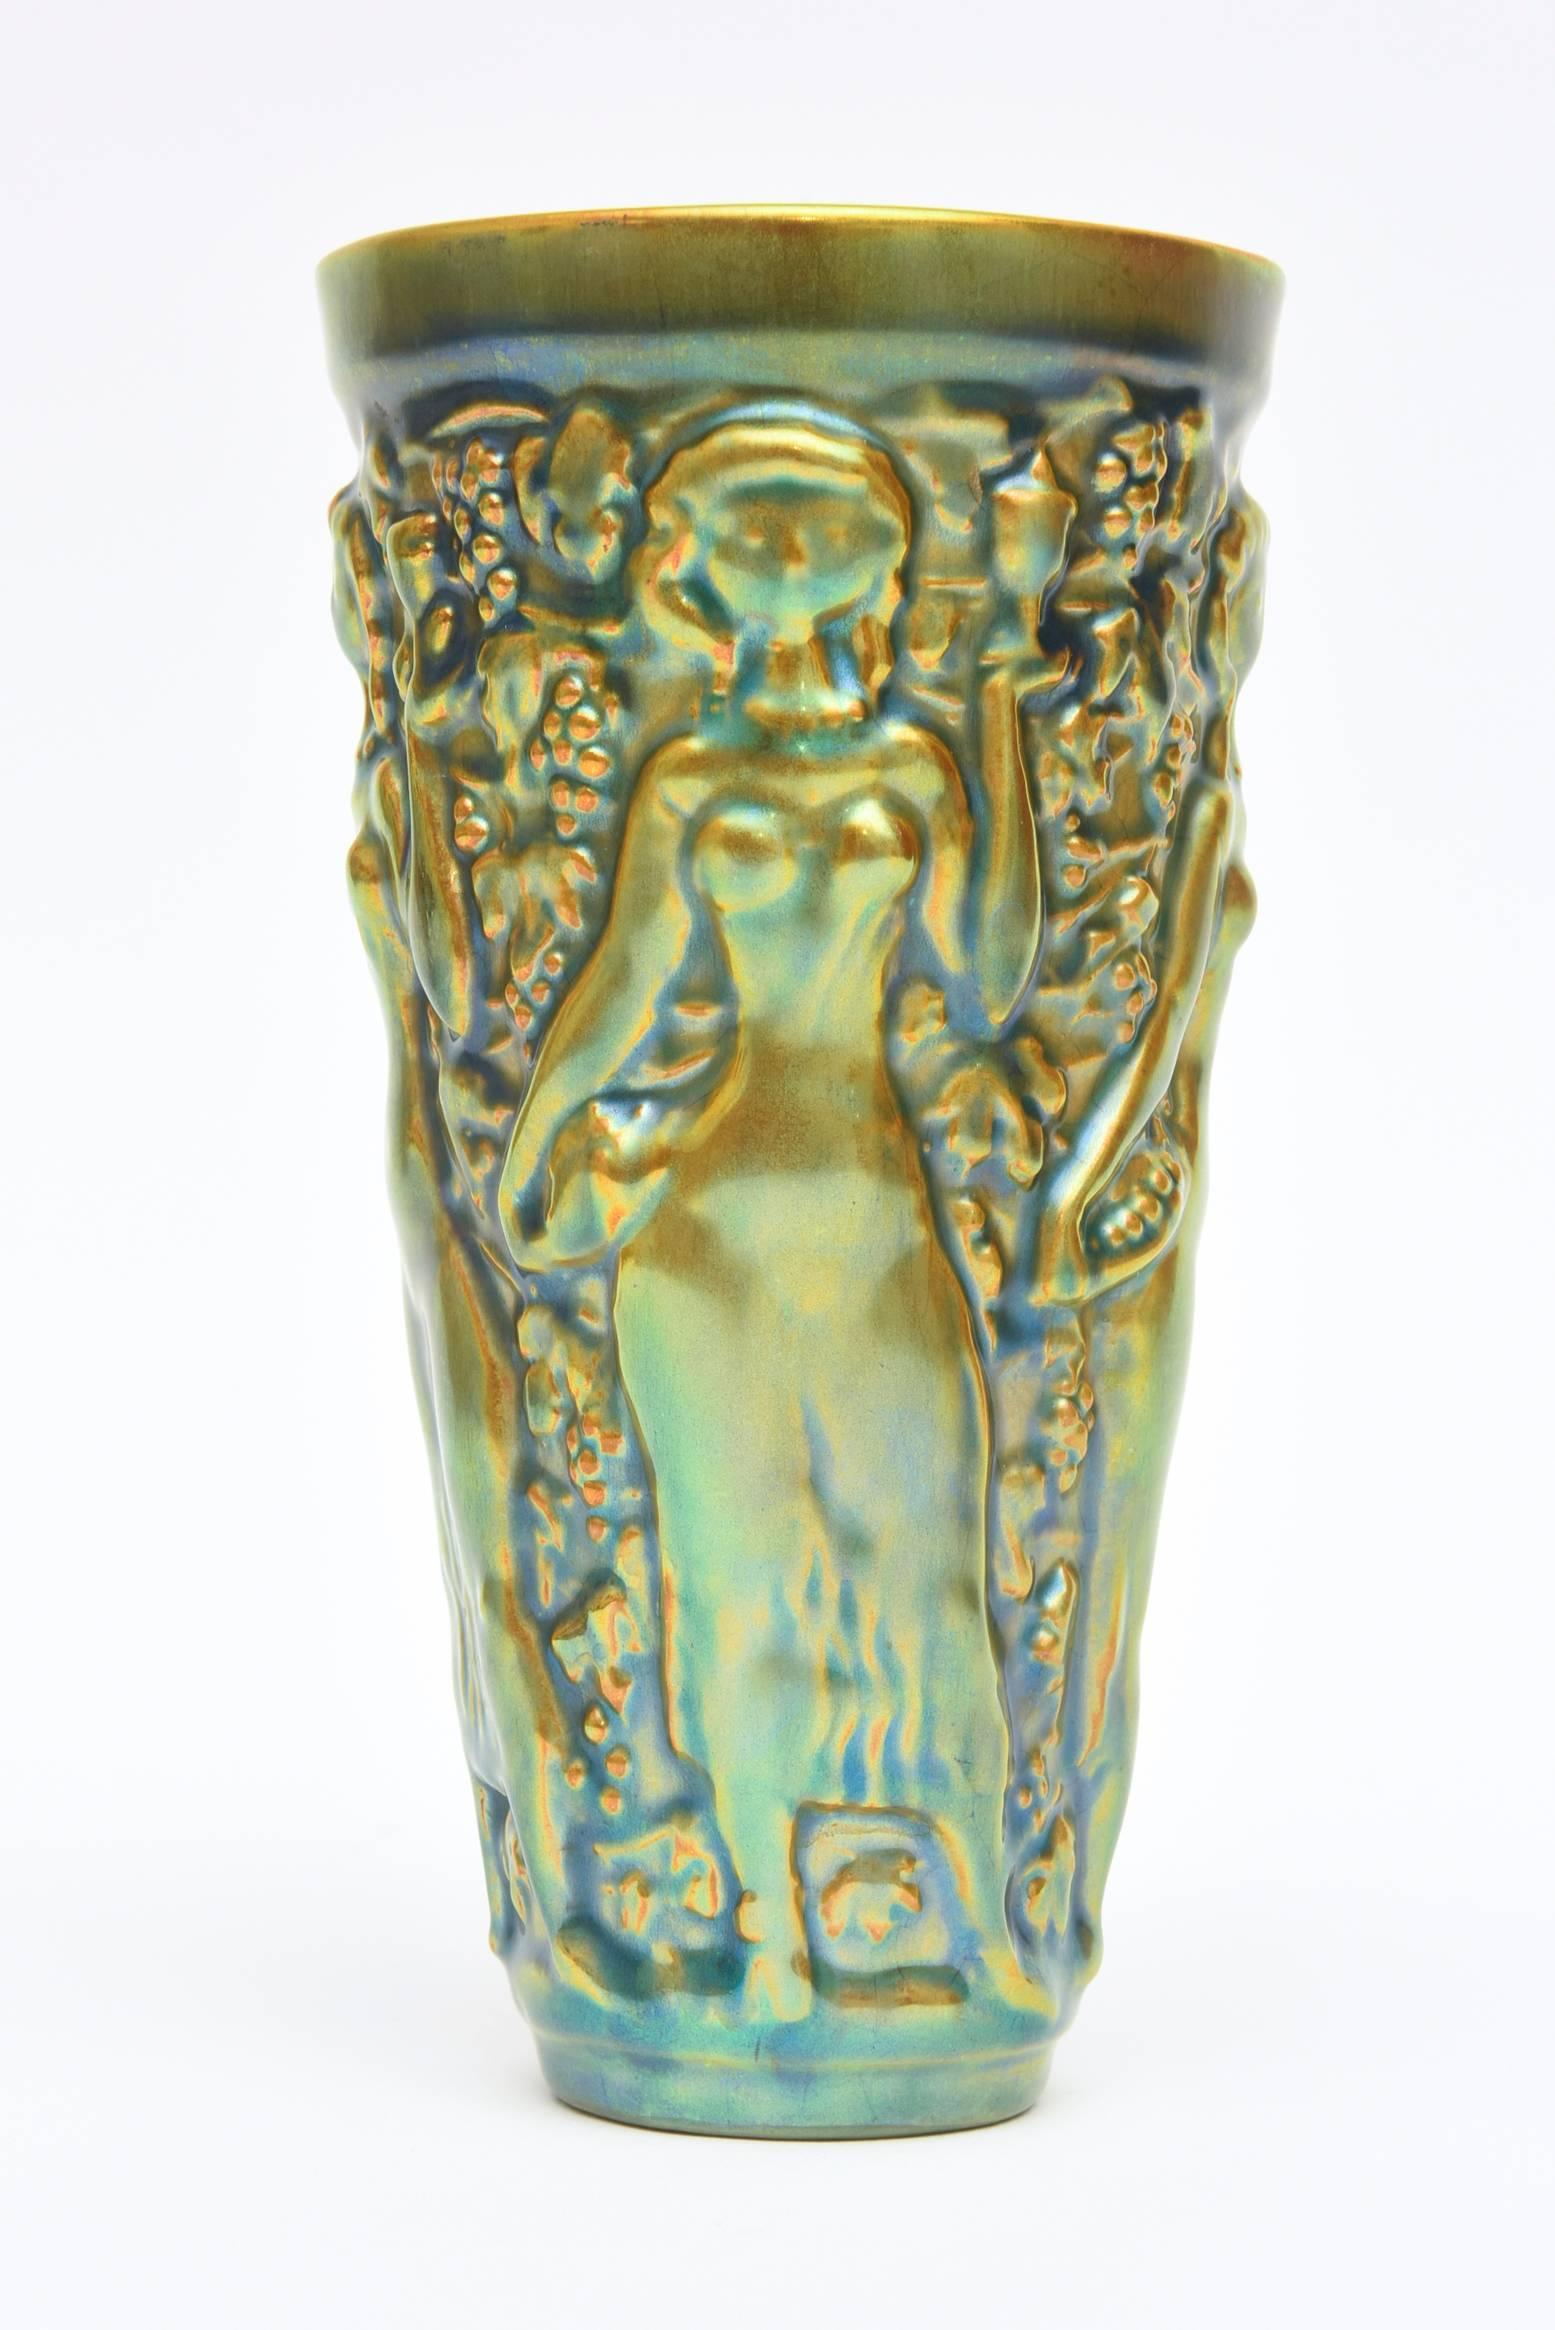 This very vintage textural and raised forms of this glazed ceramic vase is by the Hungarian artist named Zsolnay. It is a glorious combination of color of elegant sensual nude reliefs in this small vase vessel and decorative ceramic luster glazed